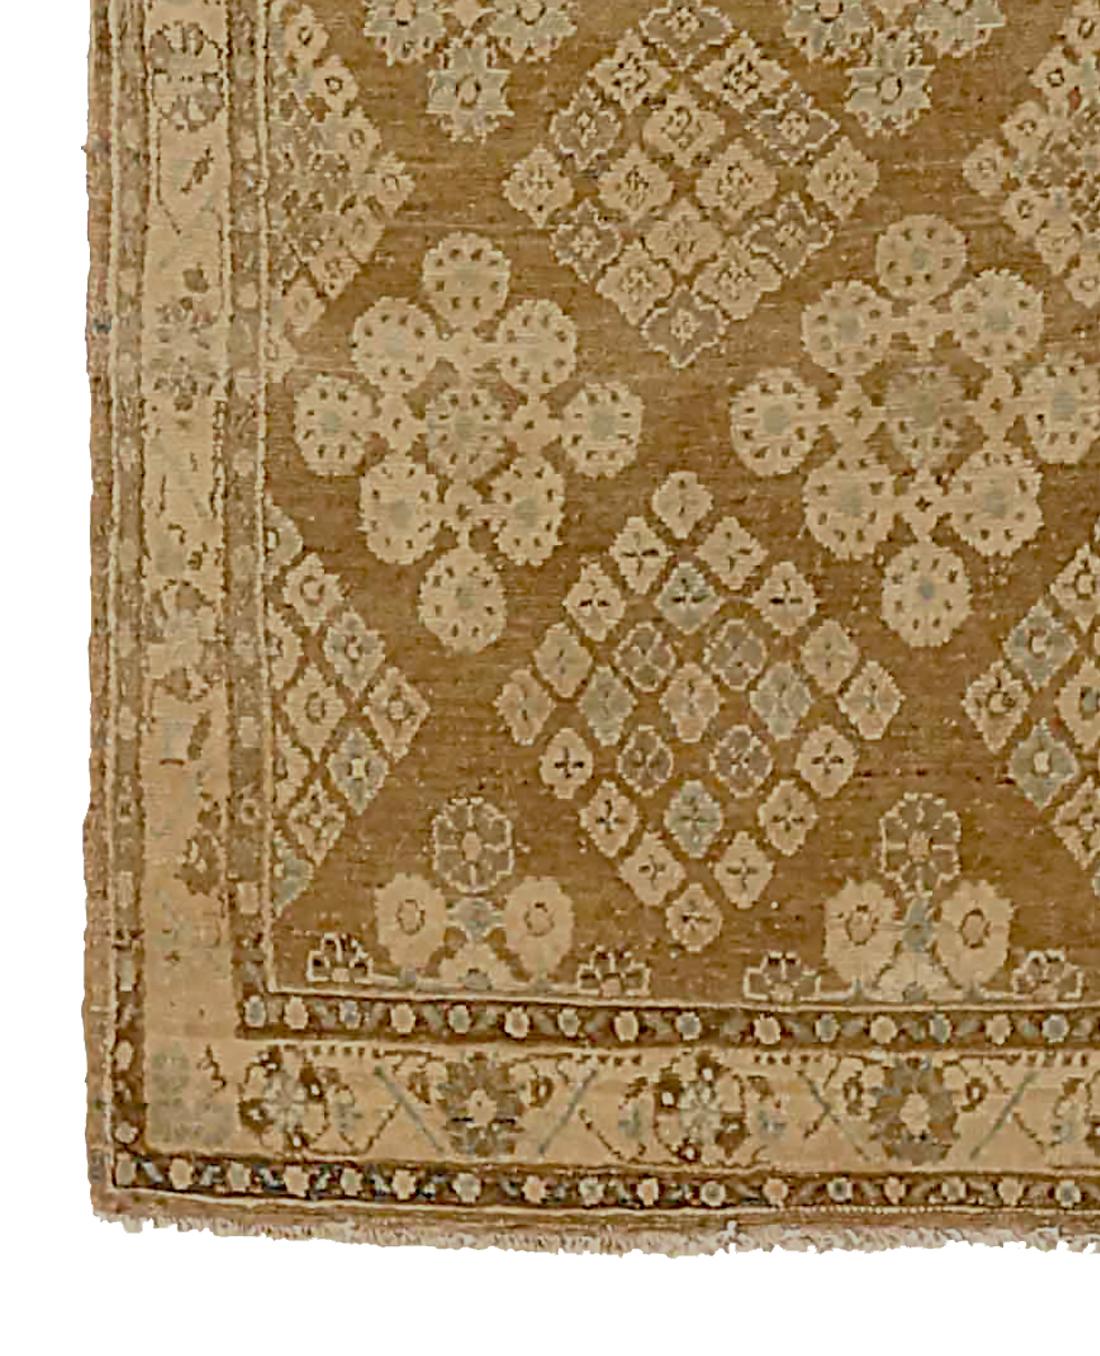 Hand-Woven Antique Persian Malayer Runner Rug with Floral Details on Brown Field For Sale